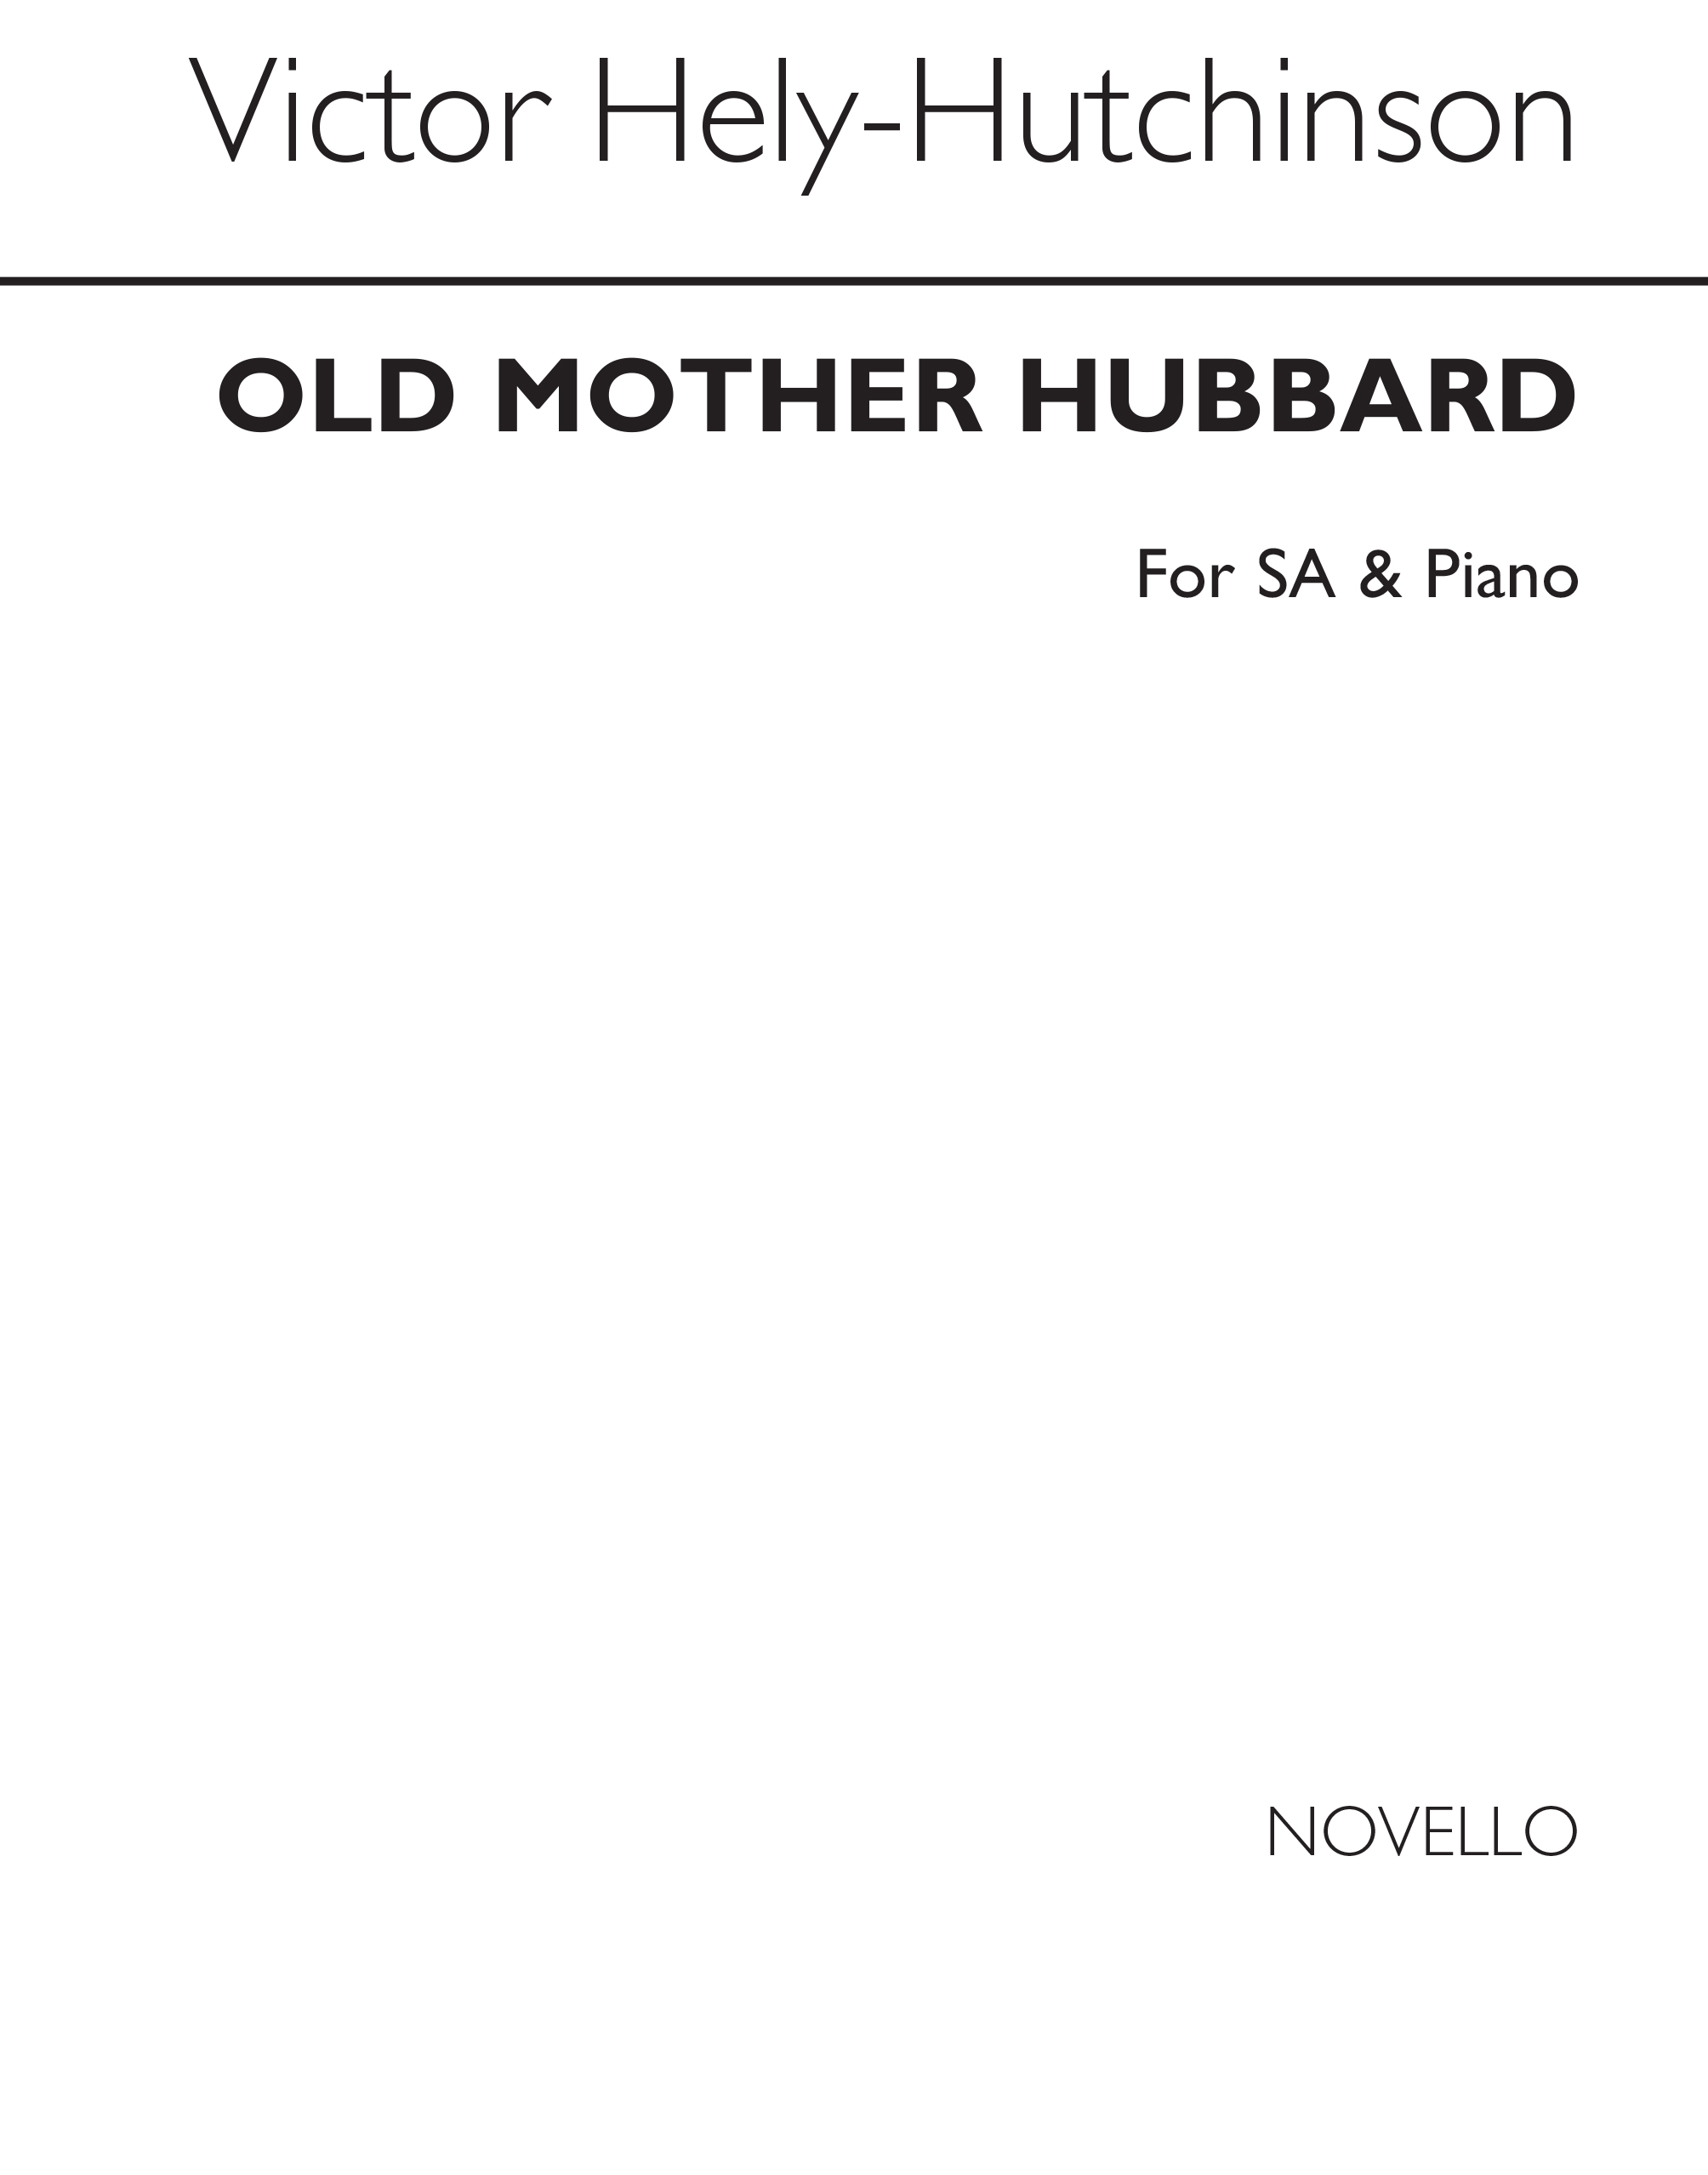 Victor Hely-Hutchinson: Old Mother Hubbard: Upper Voices: Vocal Score